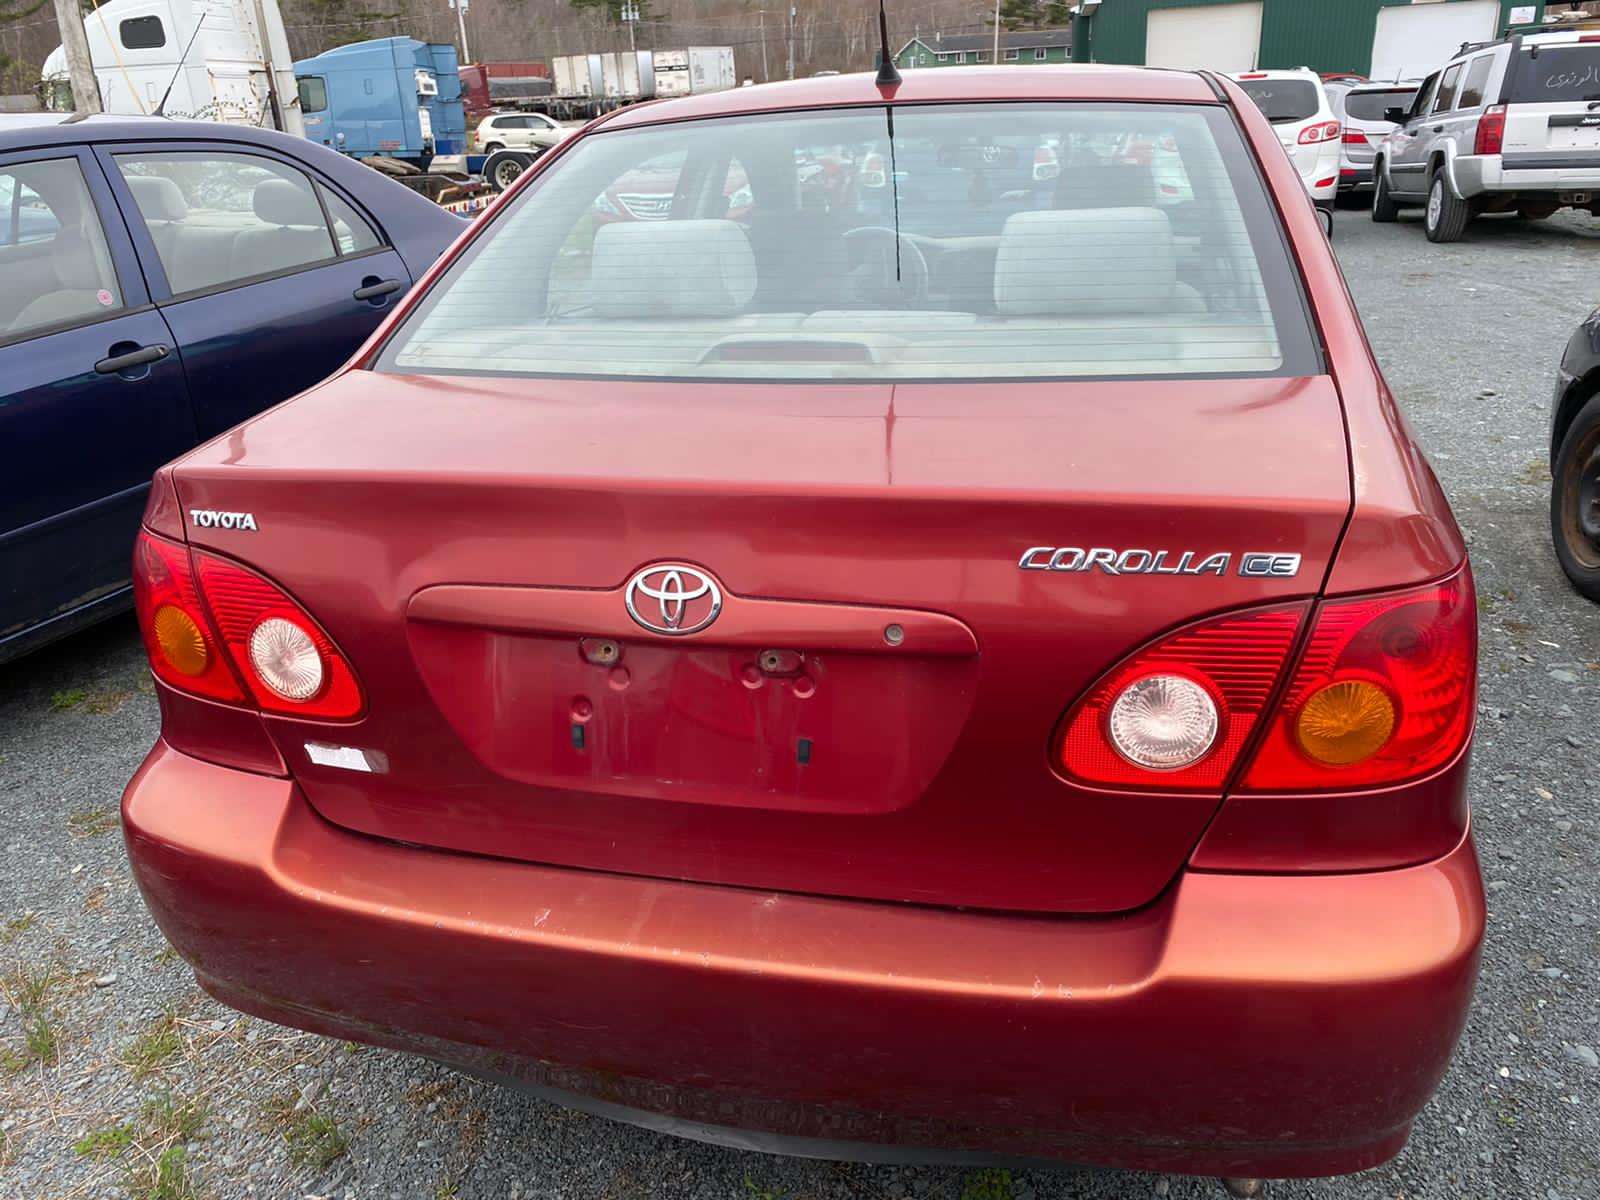 Africa E-auctioning of direct impounded Toyota Corolla Car is On sale.